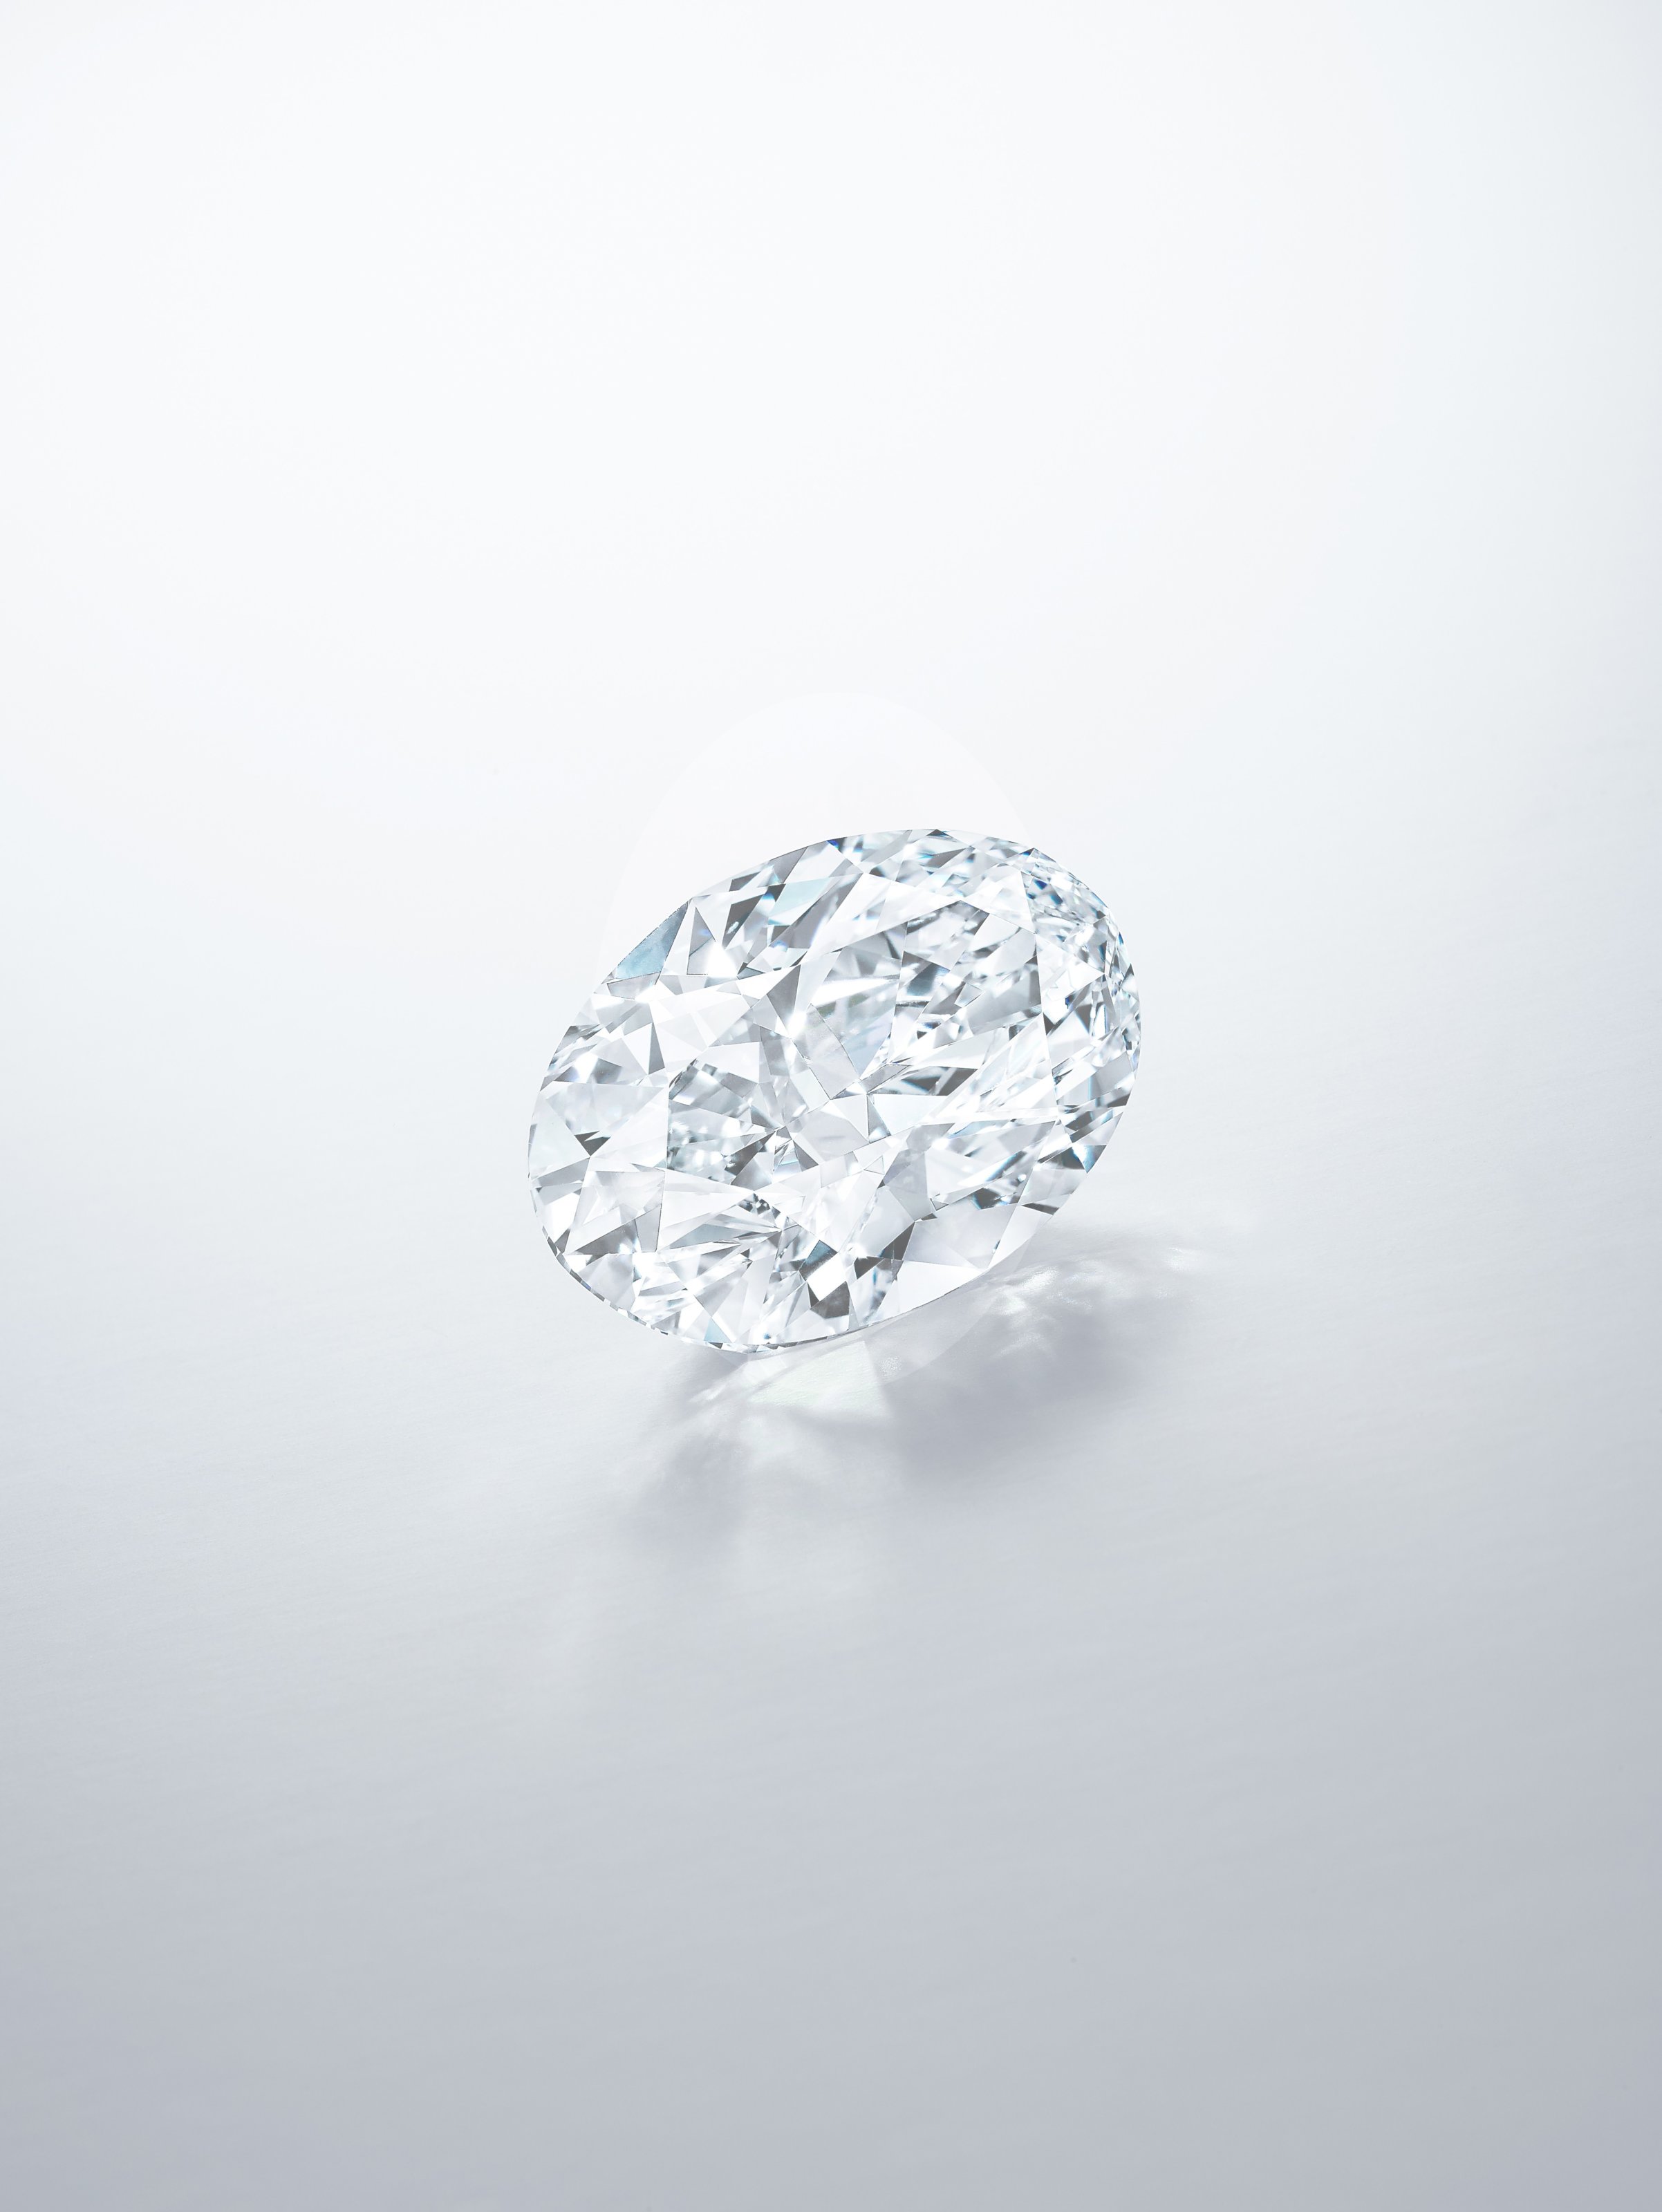 Oval cut 102 carat diamond from the Sotheby's jewelry auction showcasing brilliant diamond facets 